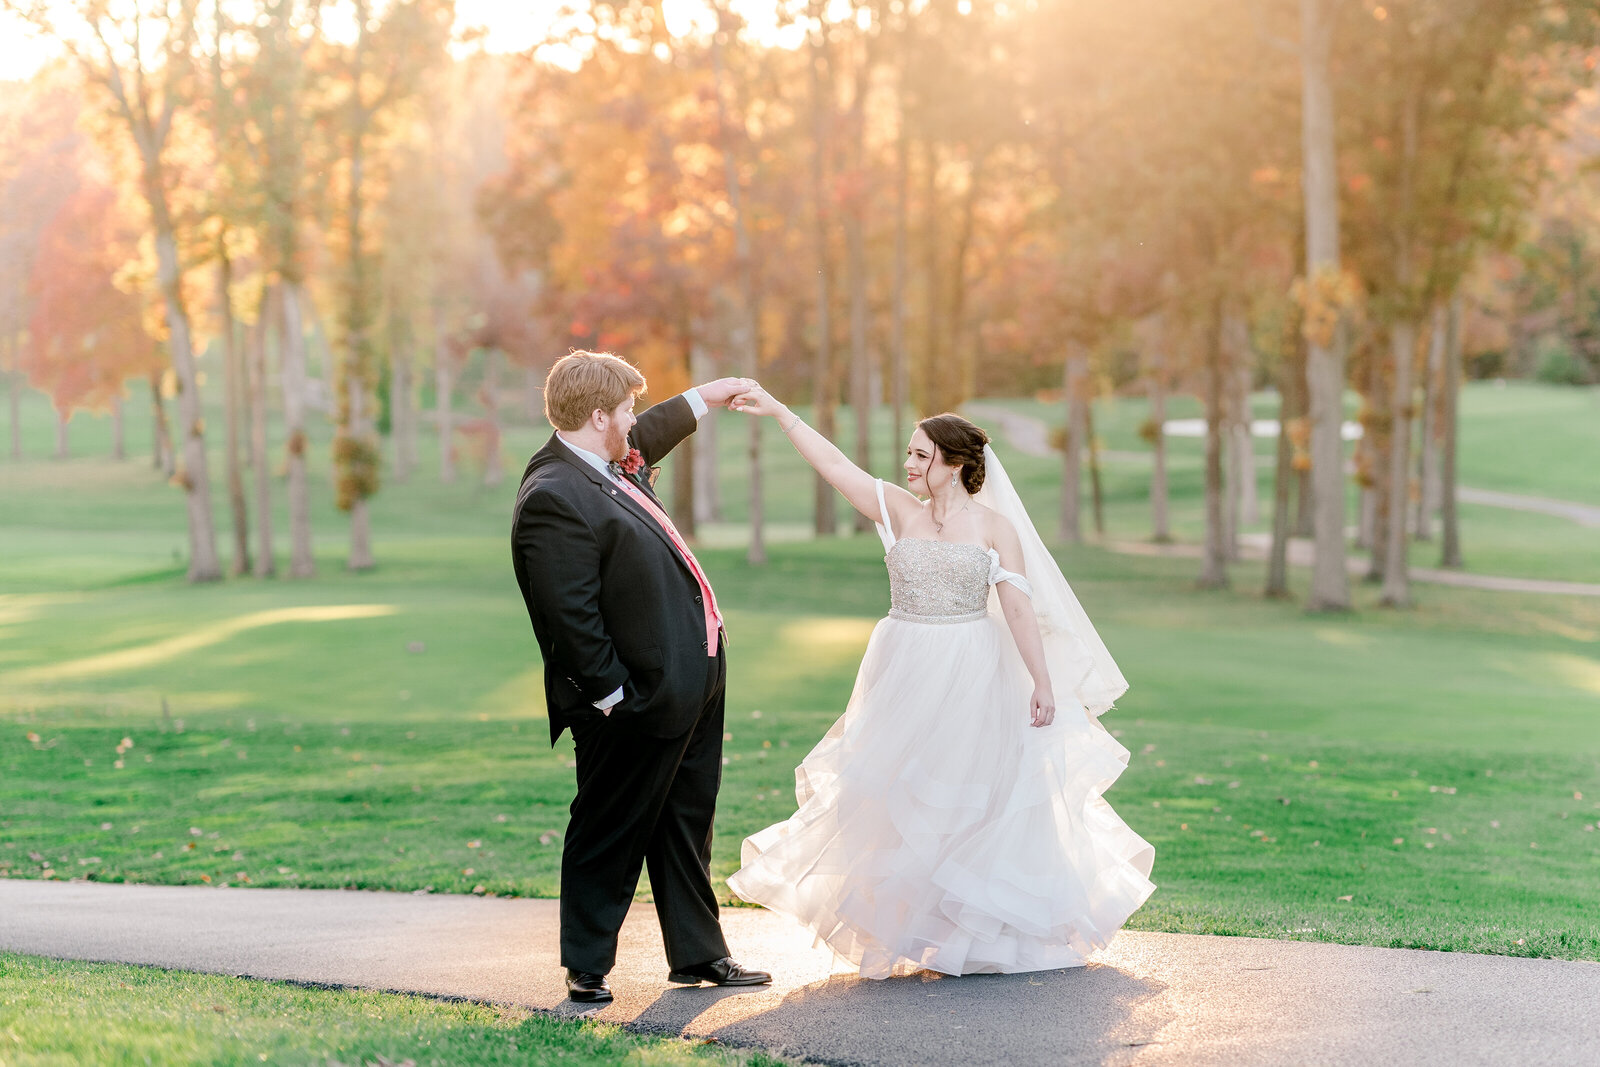 A groom twirling his bride in golden hour light during a fall wedding in Northern Virginia